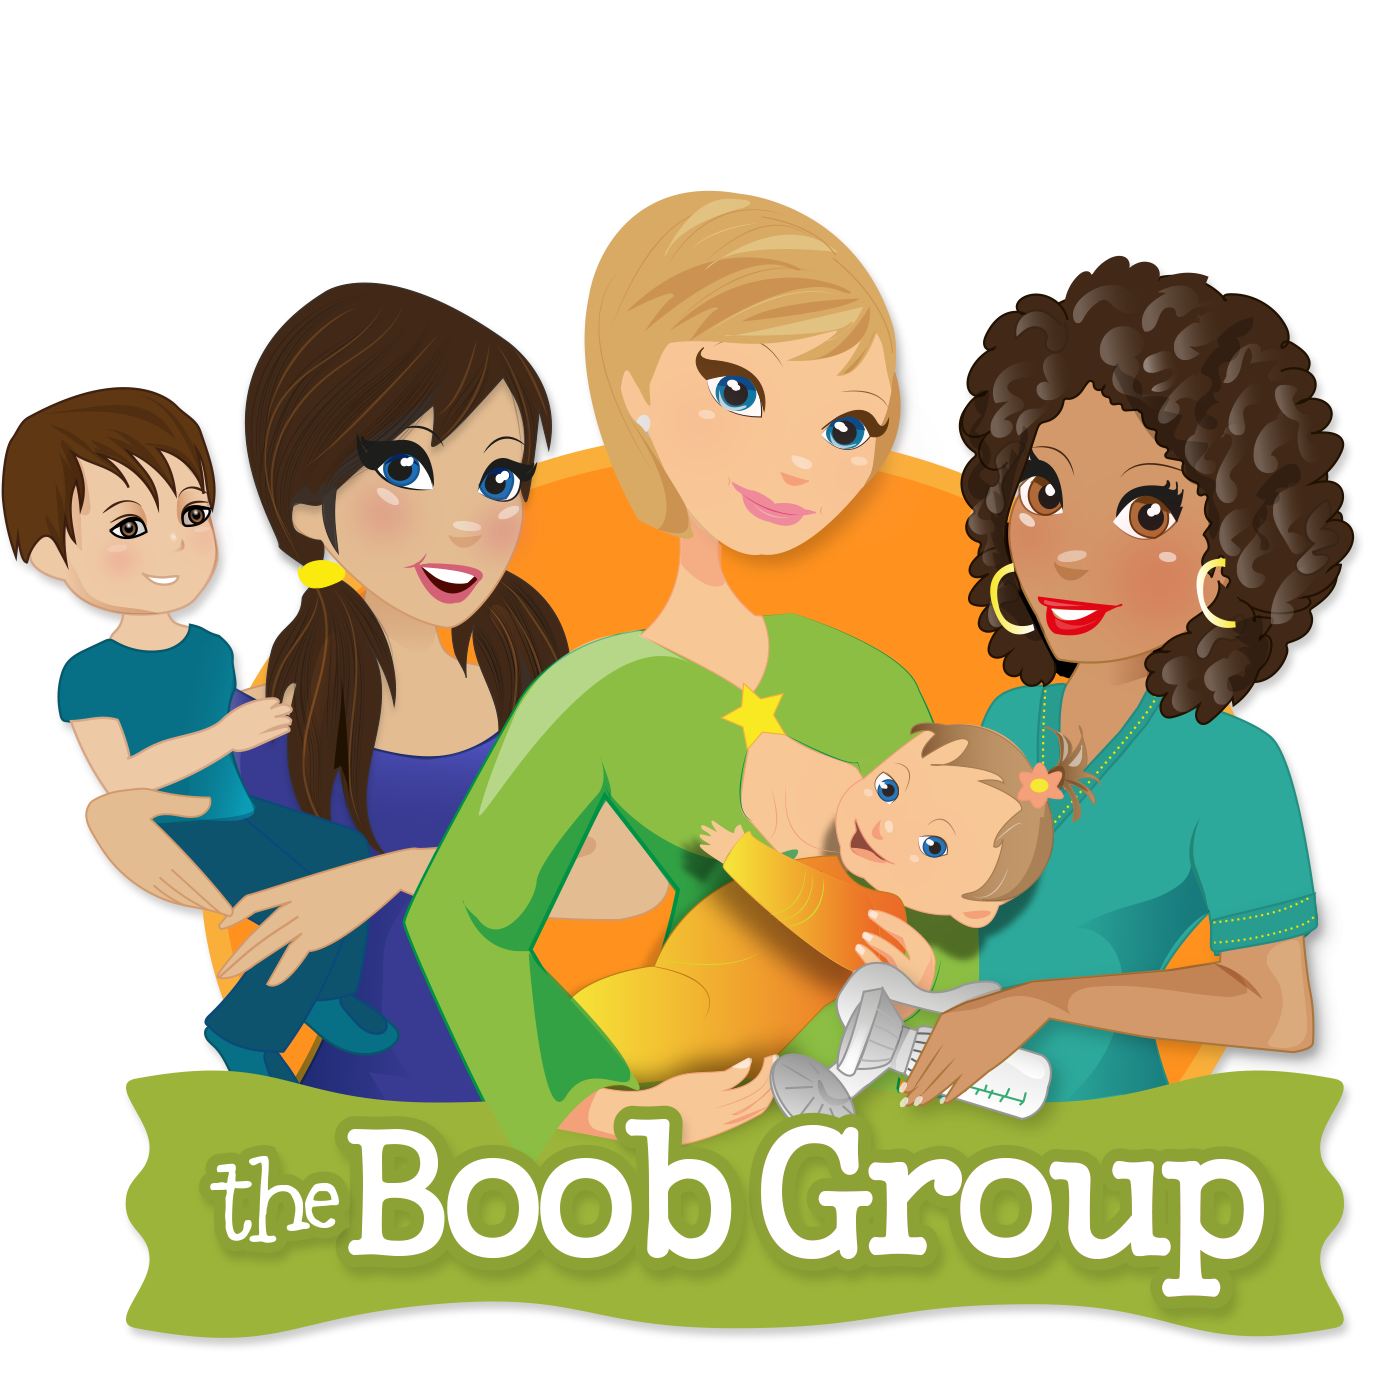 About the boob group. Morning clipart little boy mother